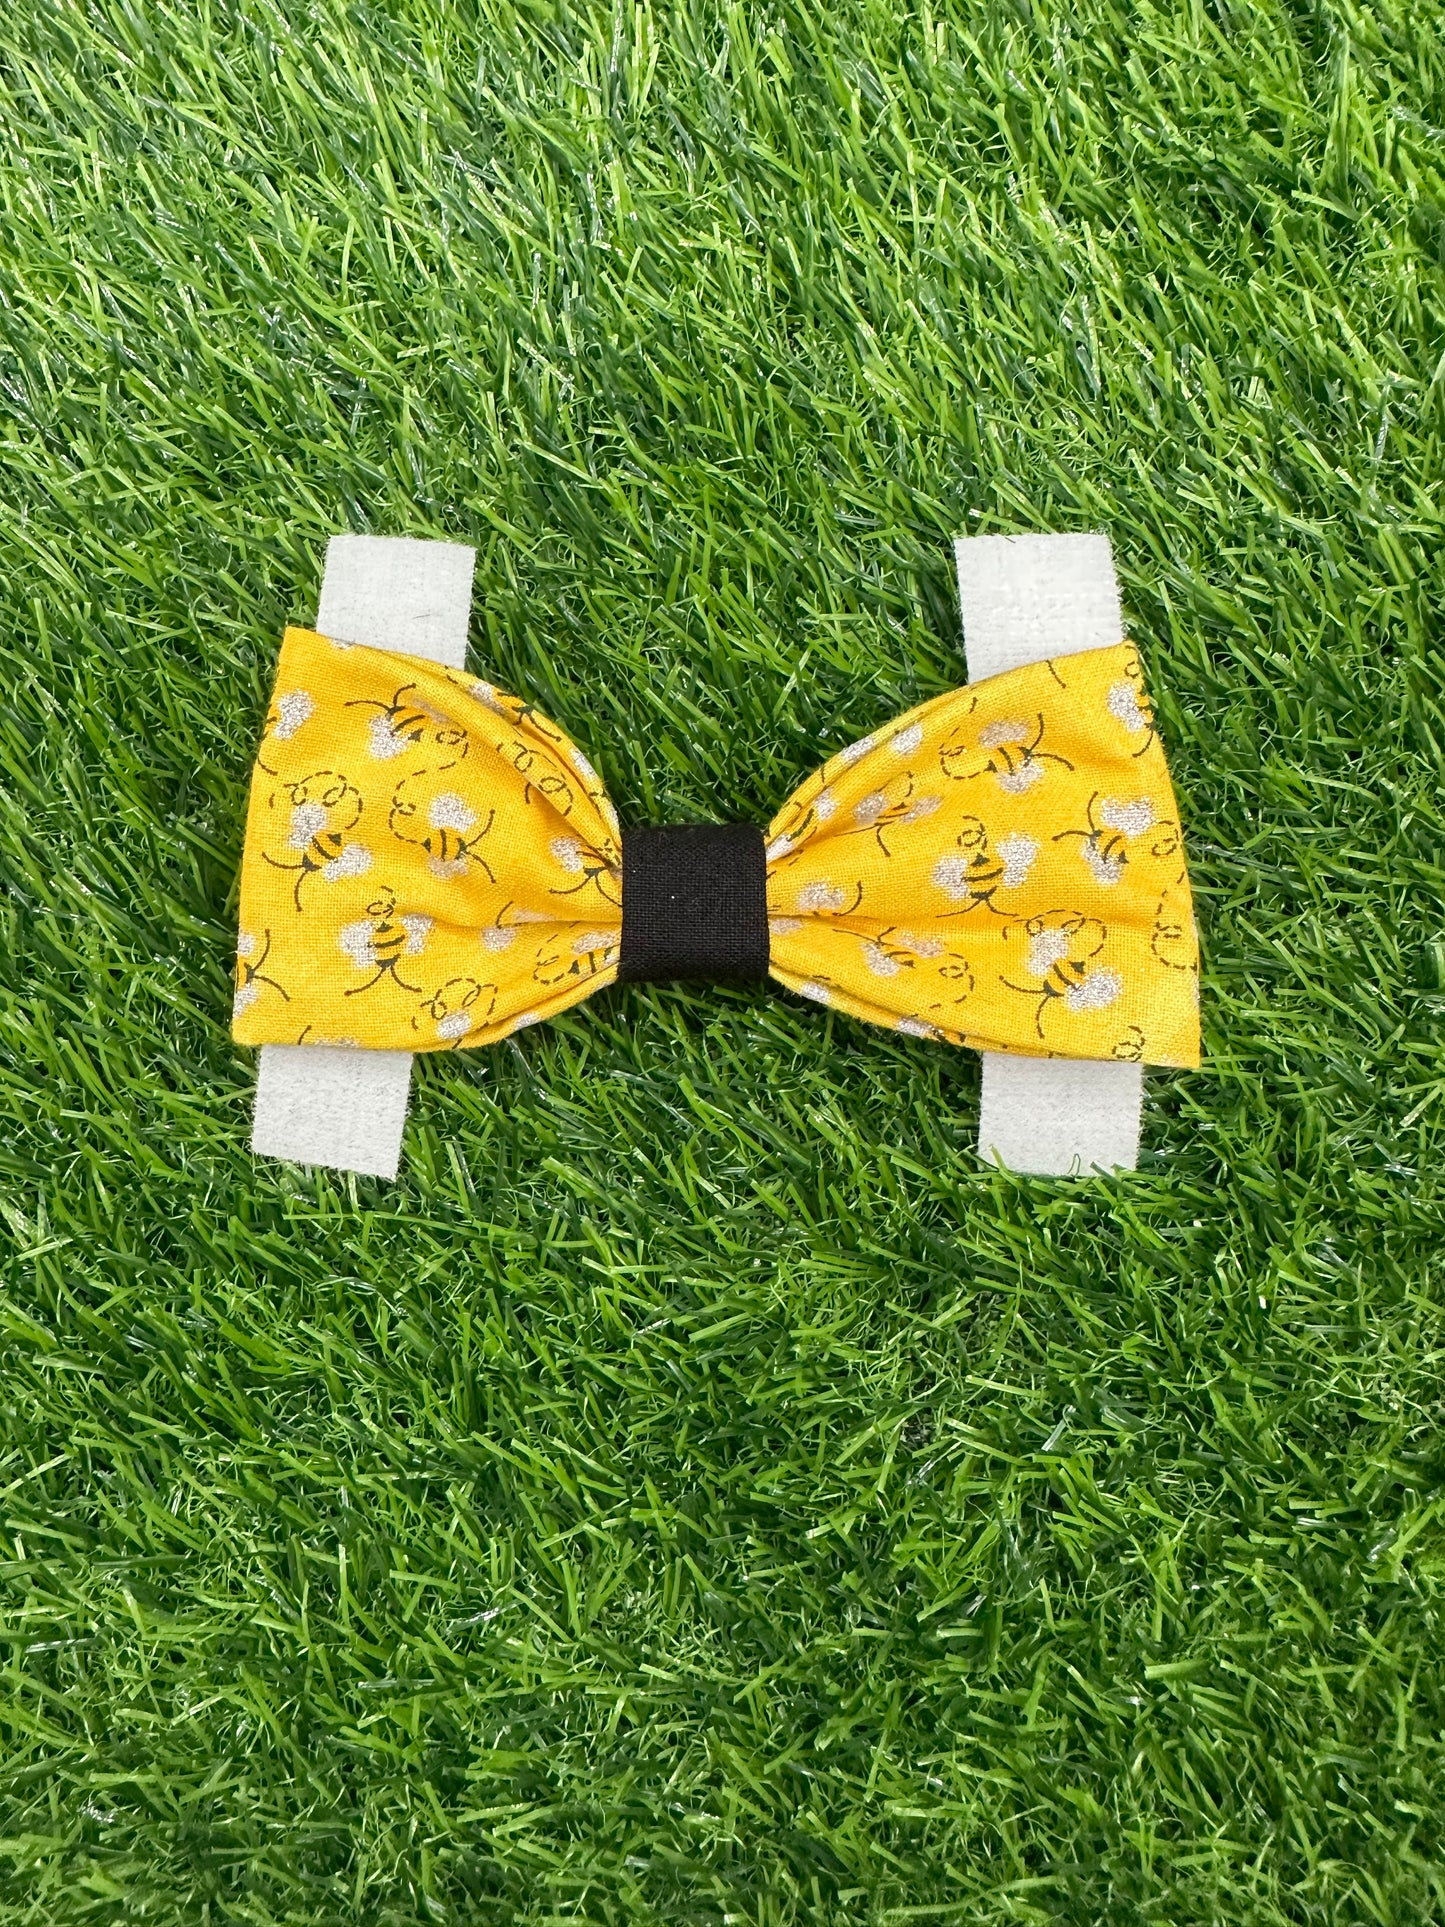 Busy Bumble Bees Bowtie